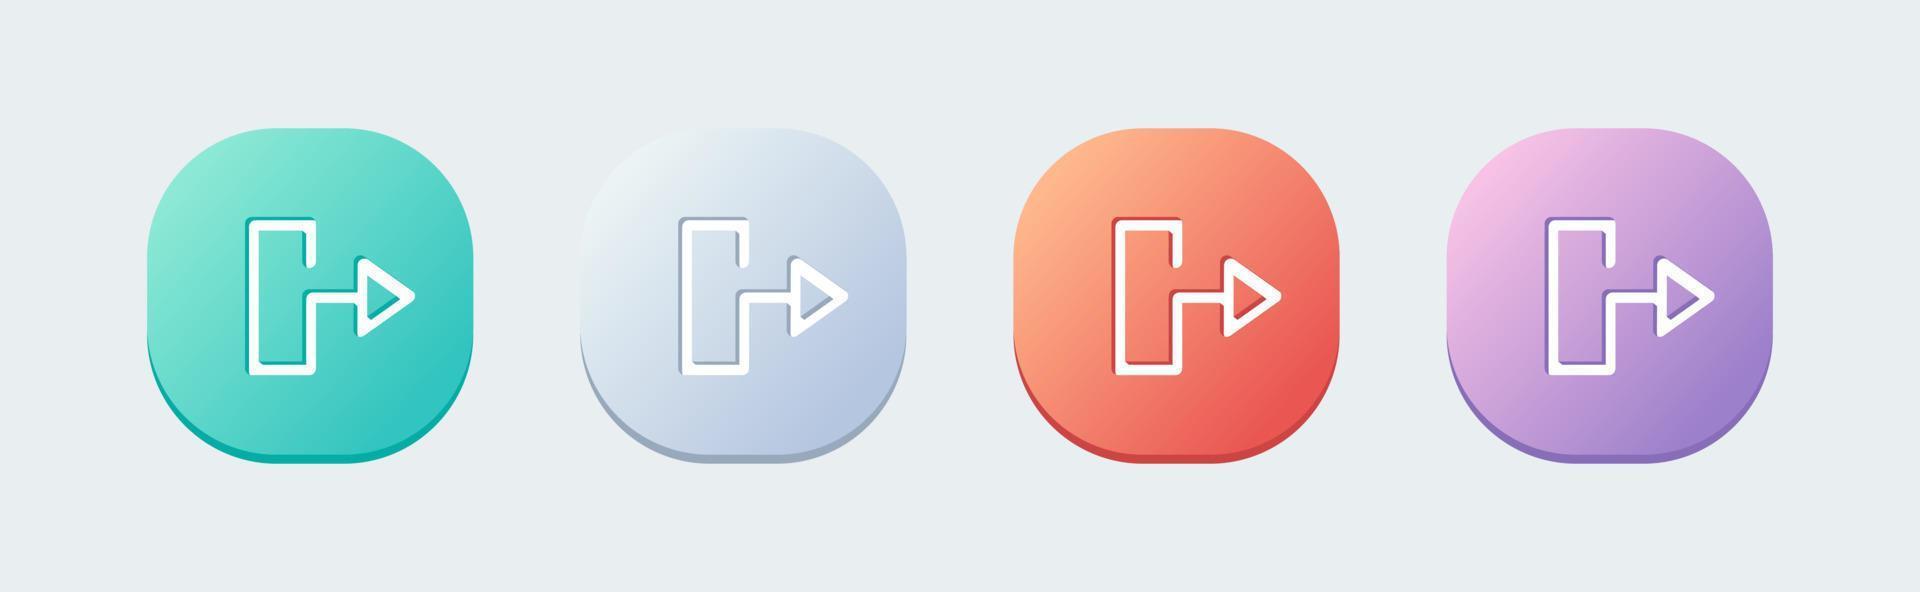 Output line icon in flat design style. Arrow signs vector illustration.